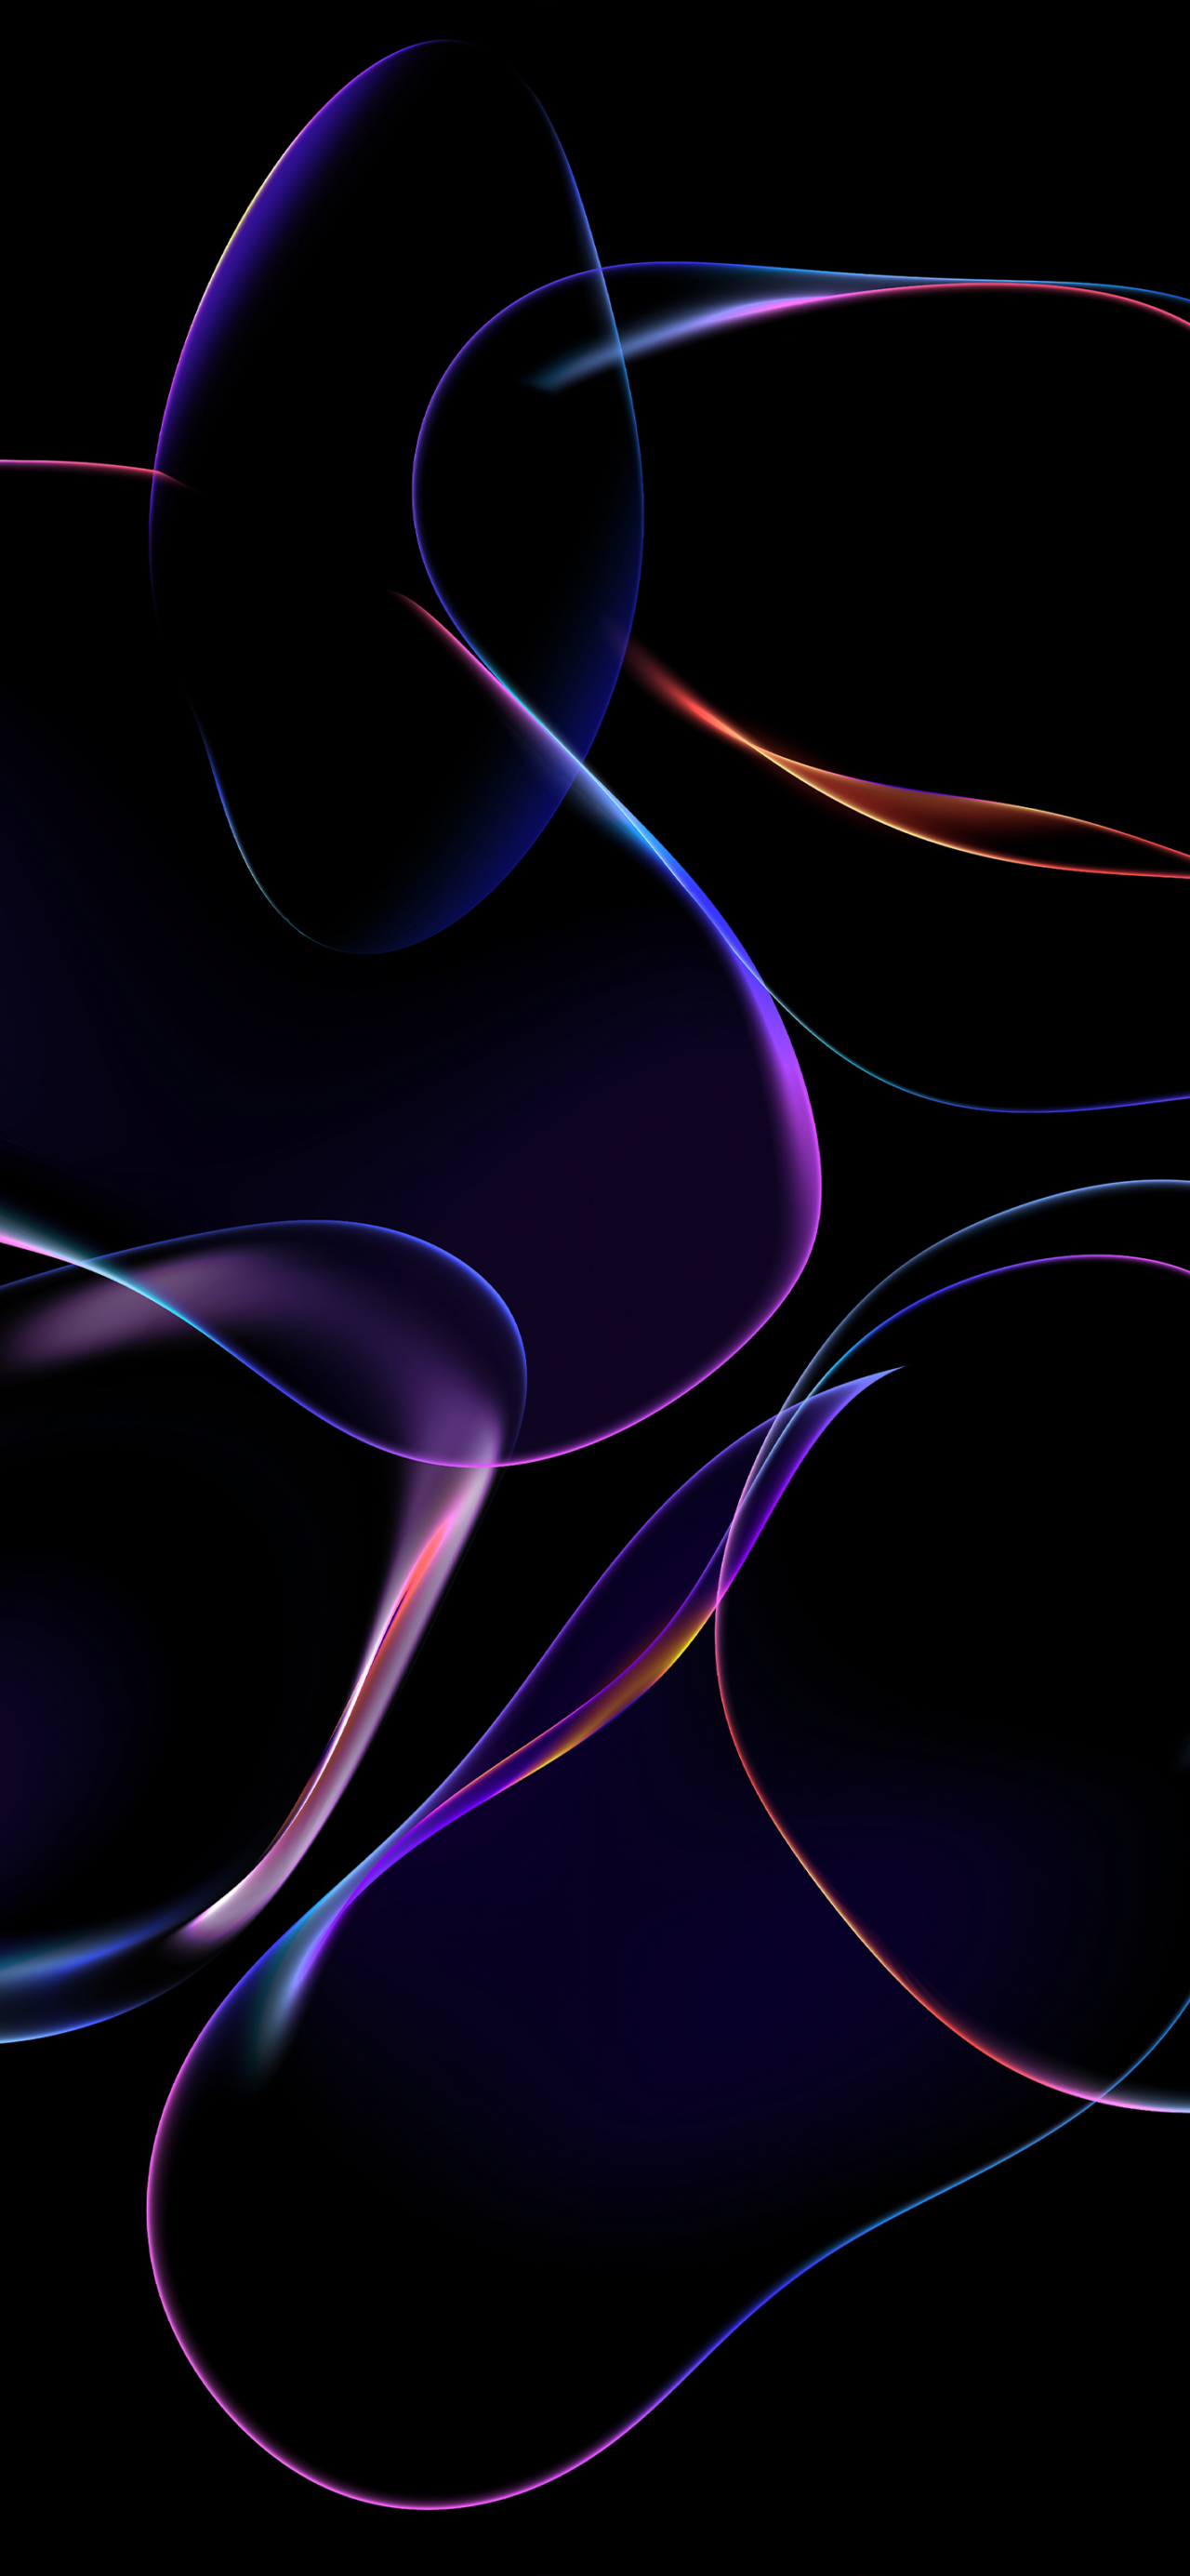 Bubbles, inspired by WWDC23 Wallpaper - Wallpapers Central